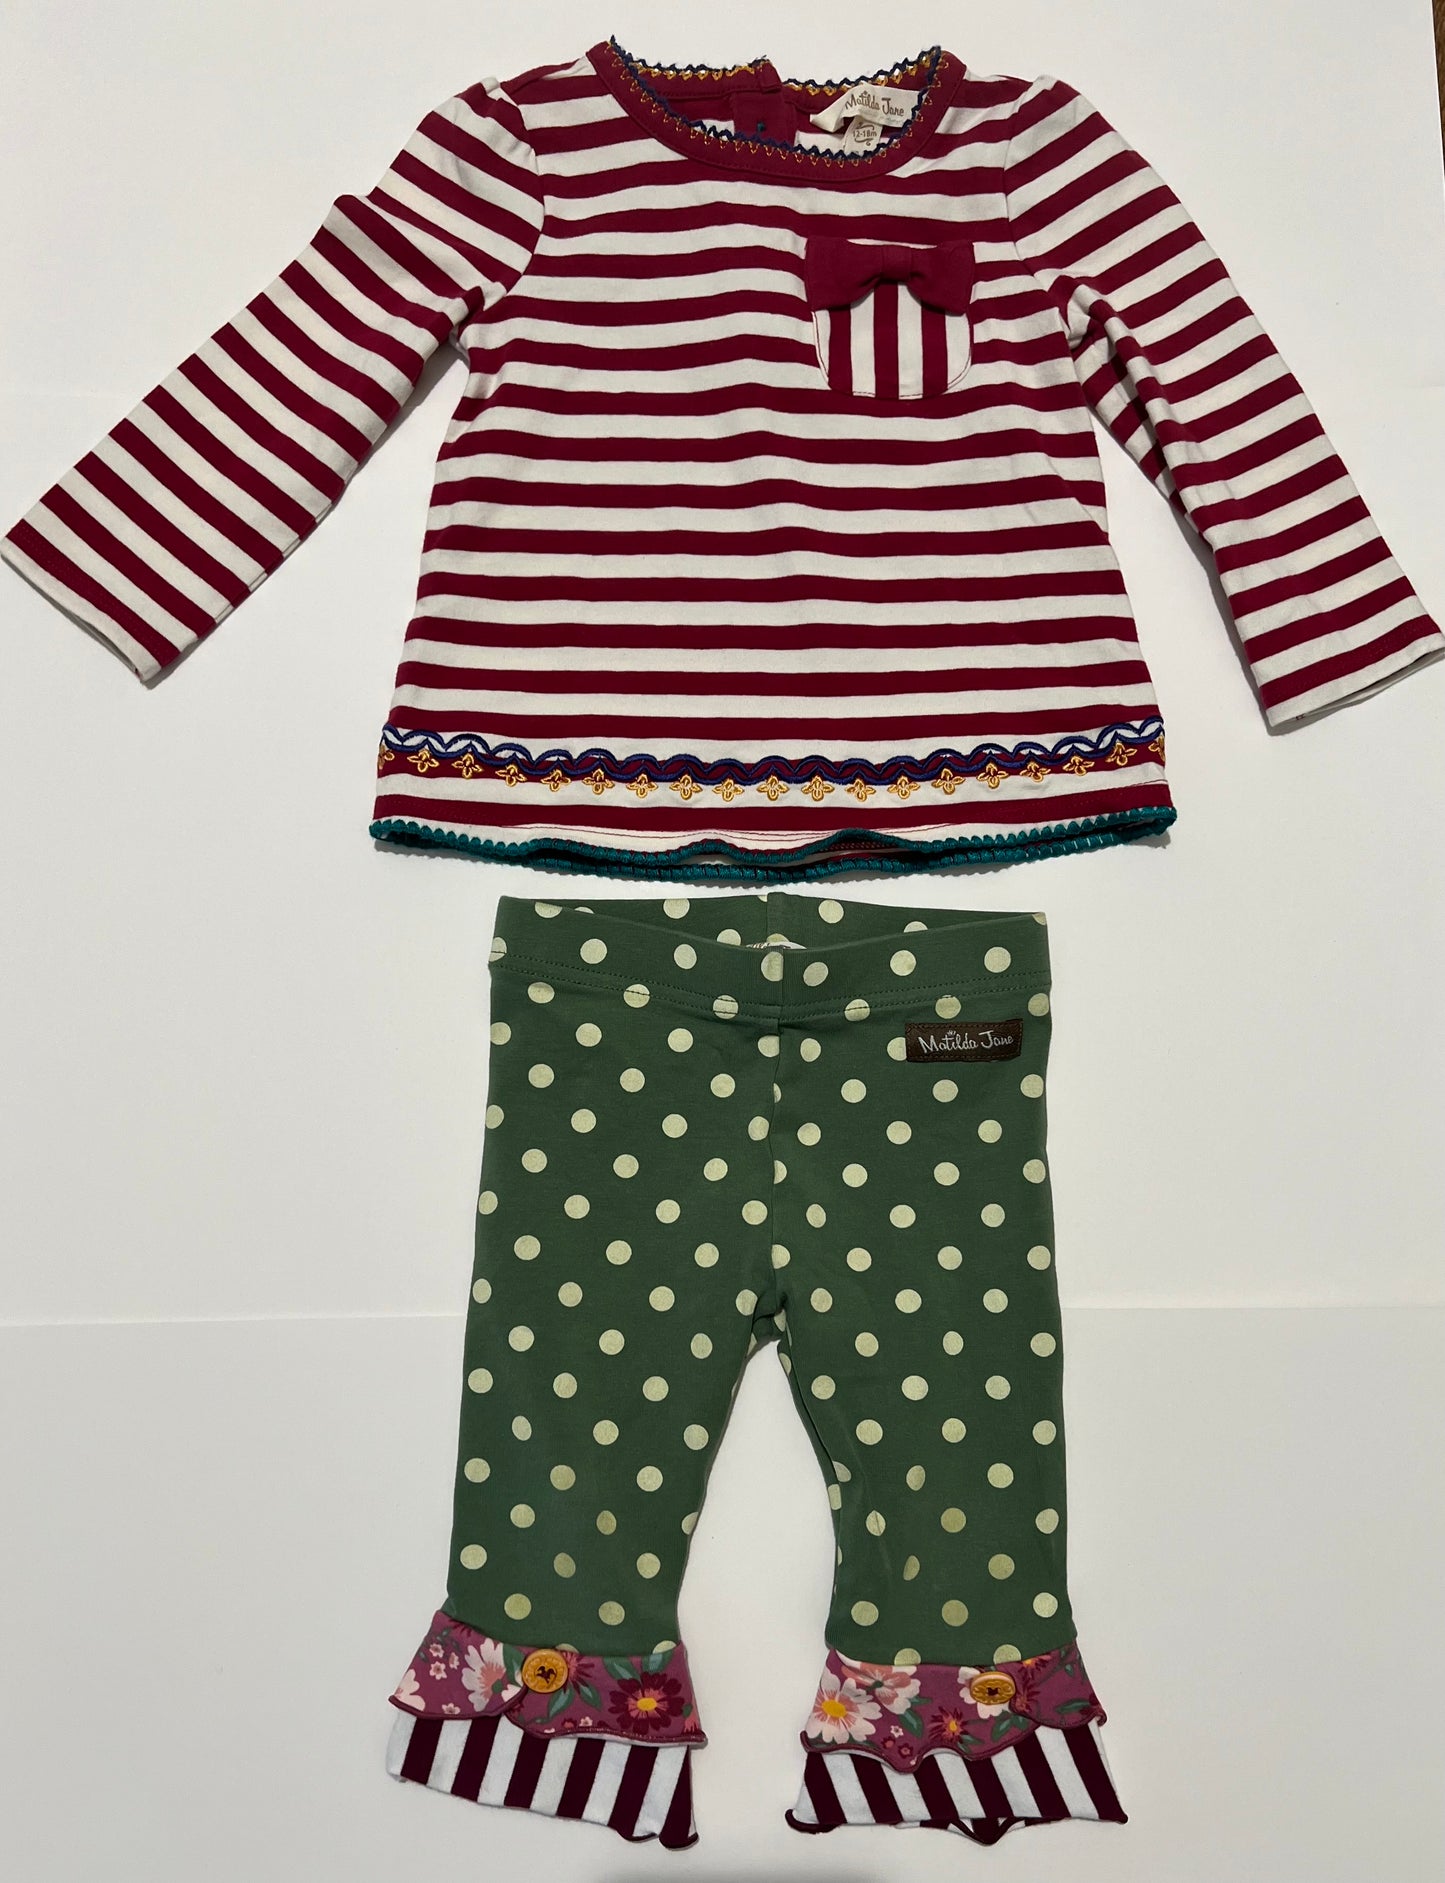 Matilda Jane Girls 12-18 months Striped / Dots Long Sleeve Pant Outfit